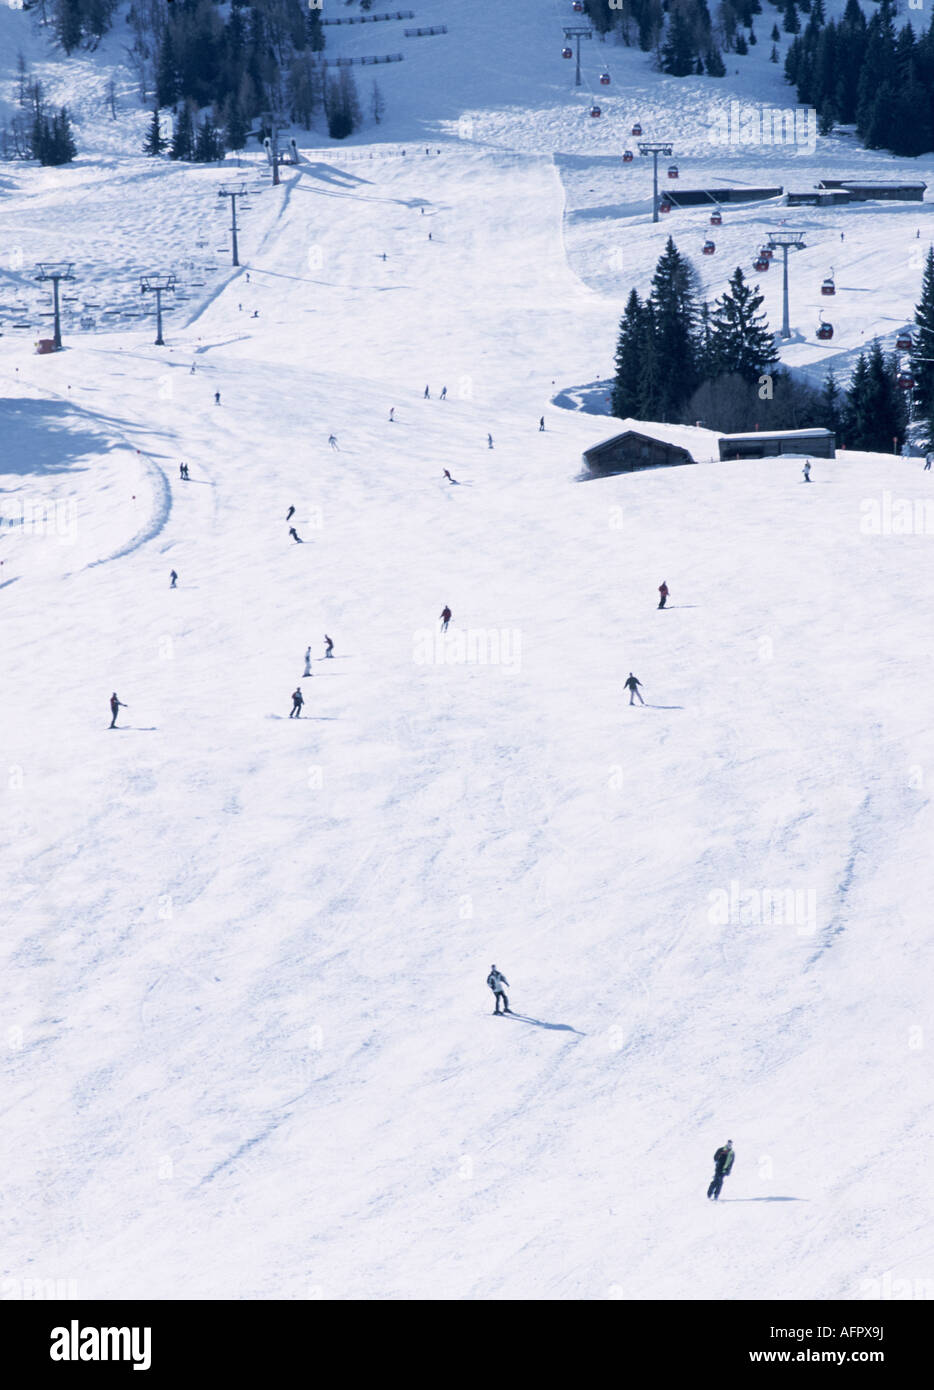 Skiers On Alpine Ski Slope at Soll Austria with Trees and Lifts Visible in Background Stock Photo